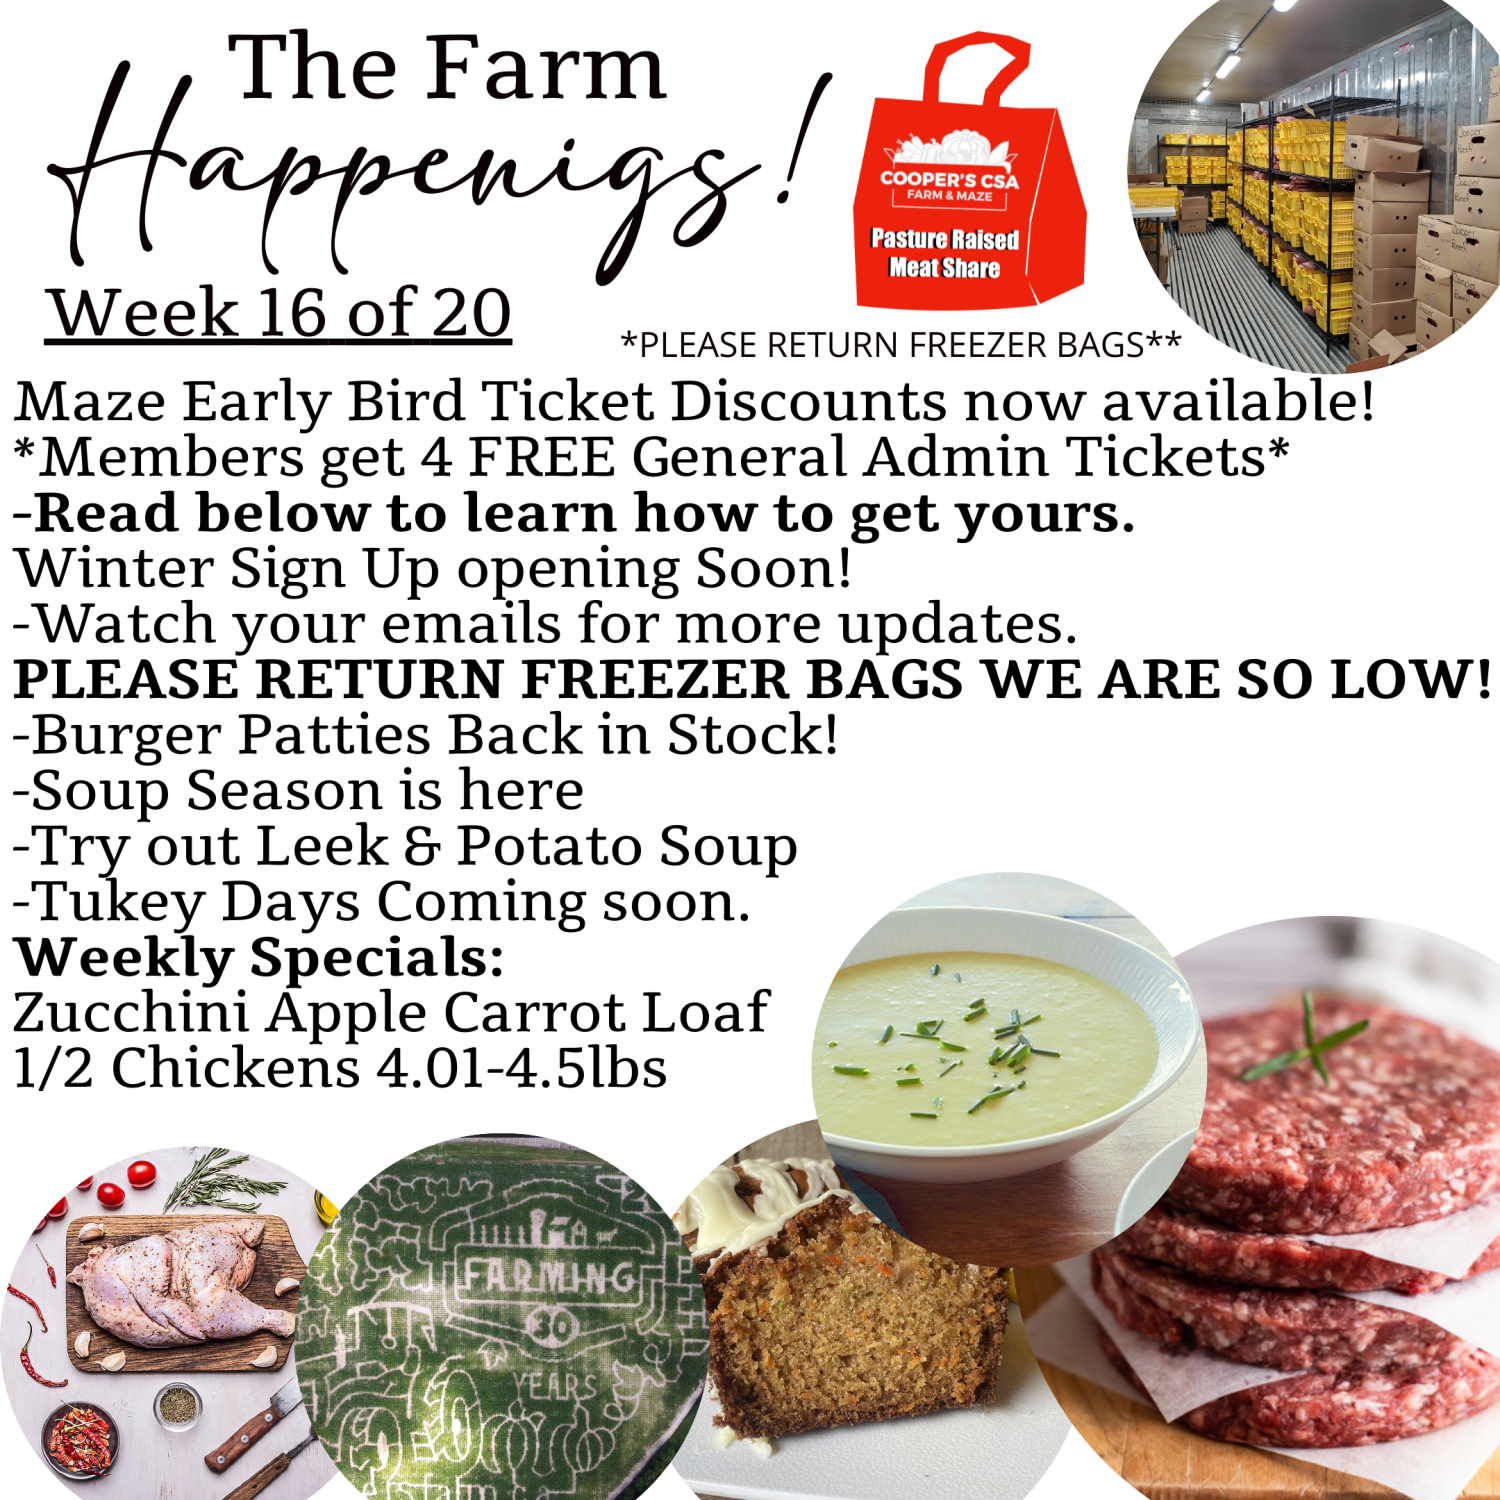 "Pasture Meat Shares"-Coopers CSA Farm Farm Happenings Week 16